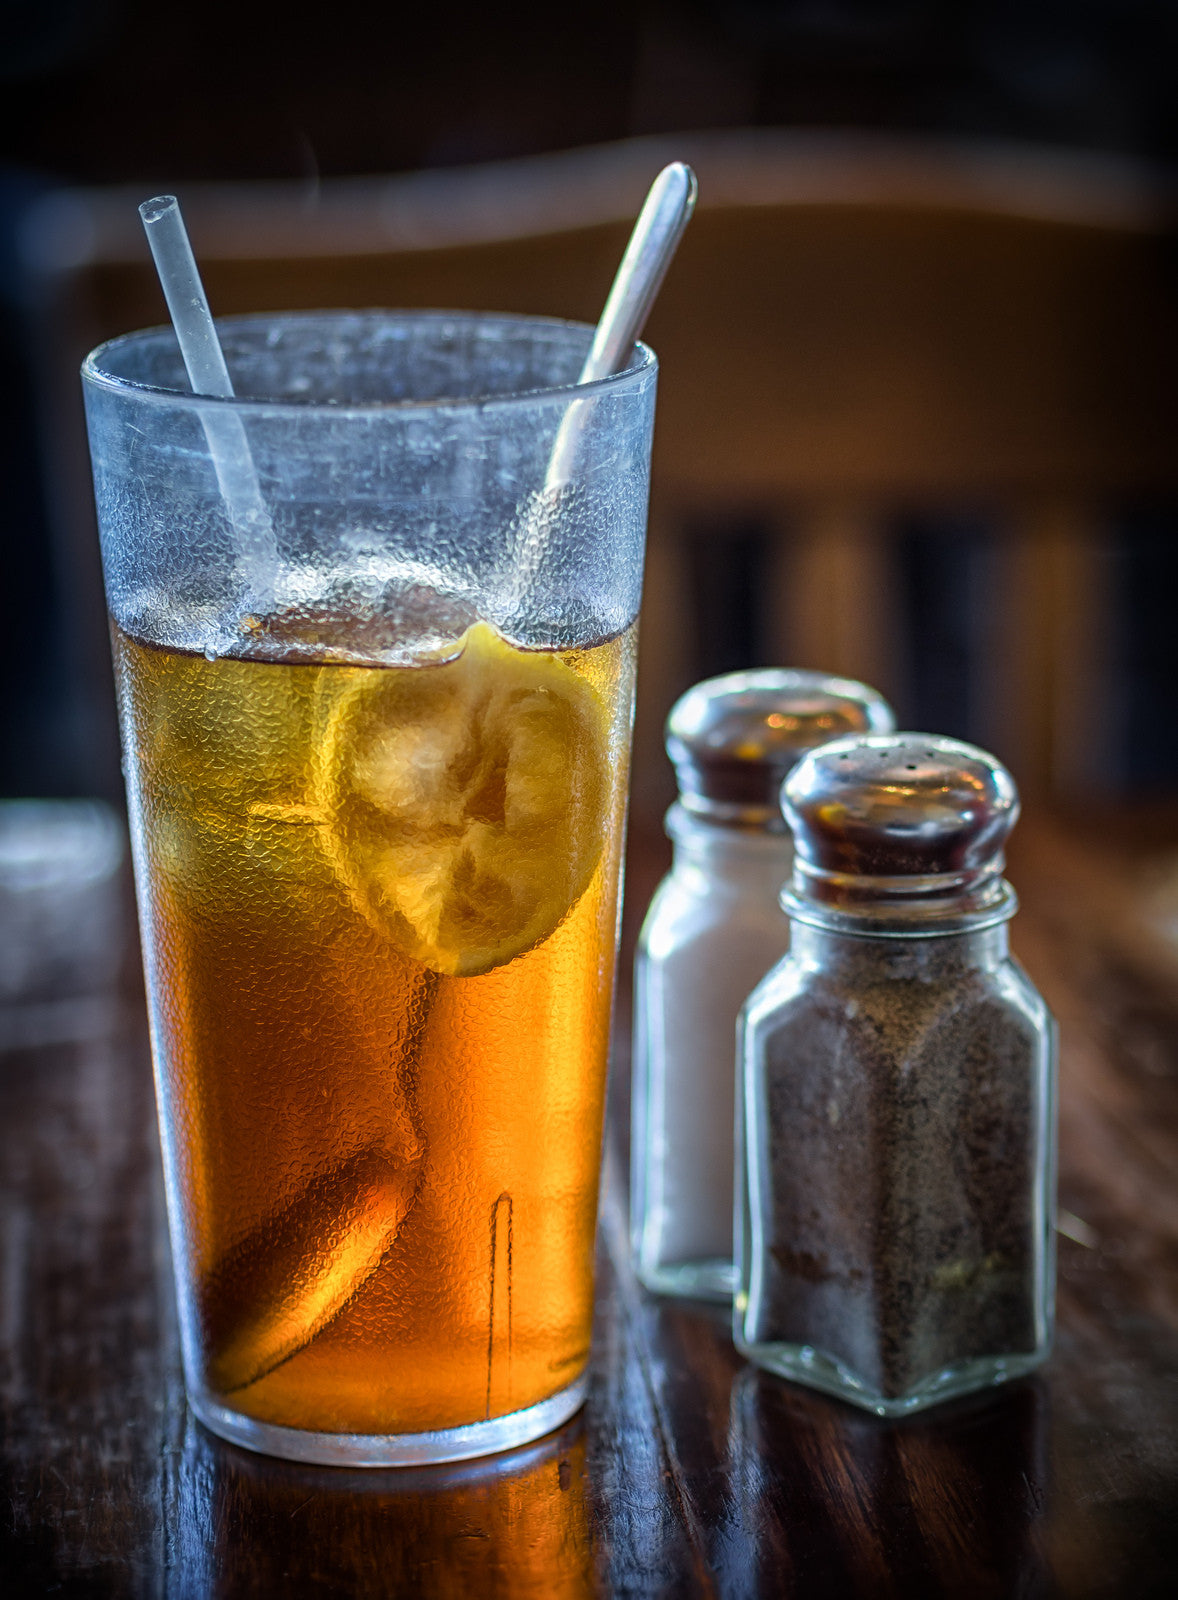 The Best Way to Make Gallons of Iced Tea